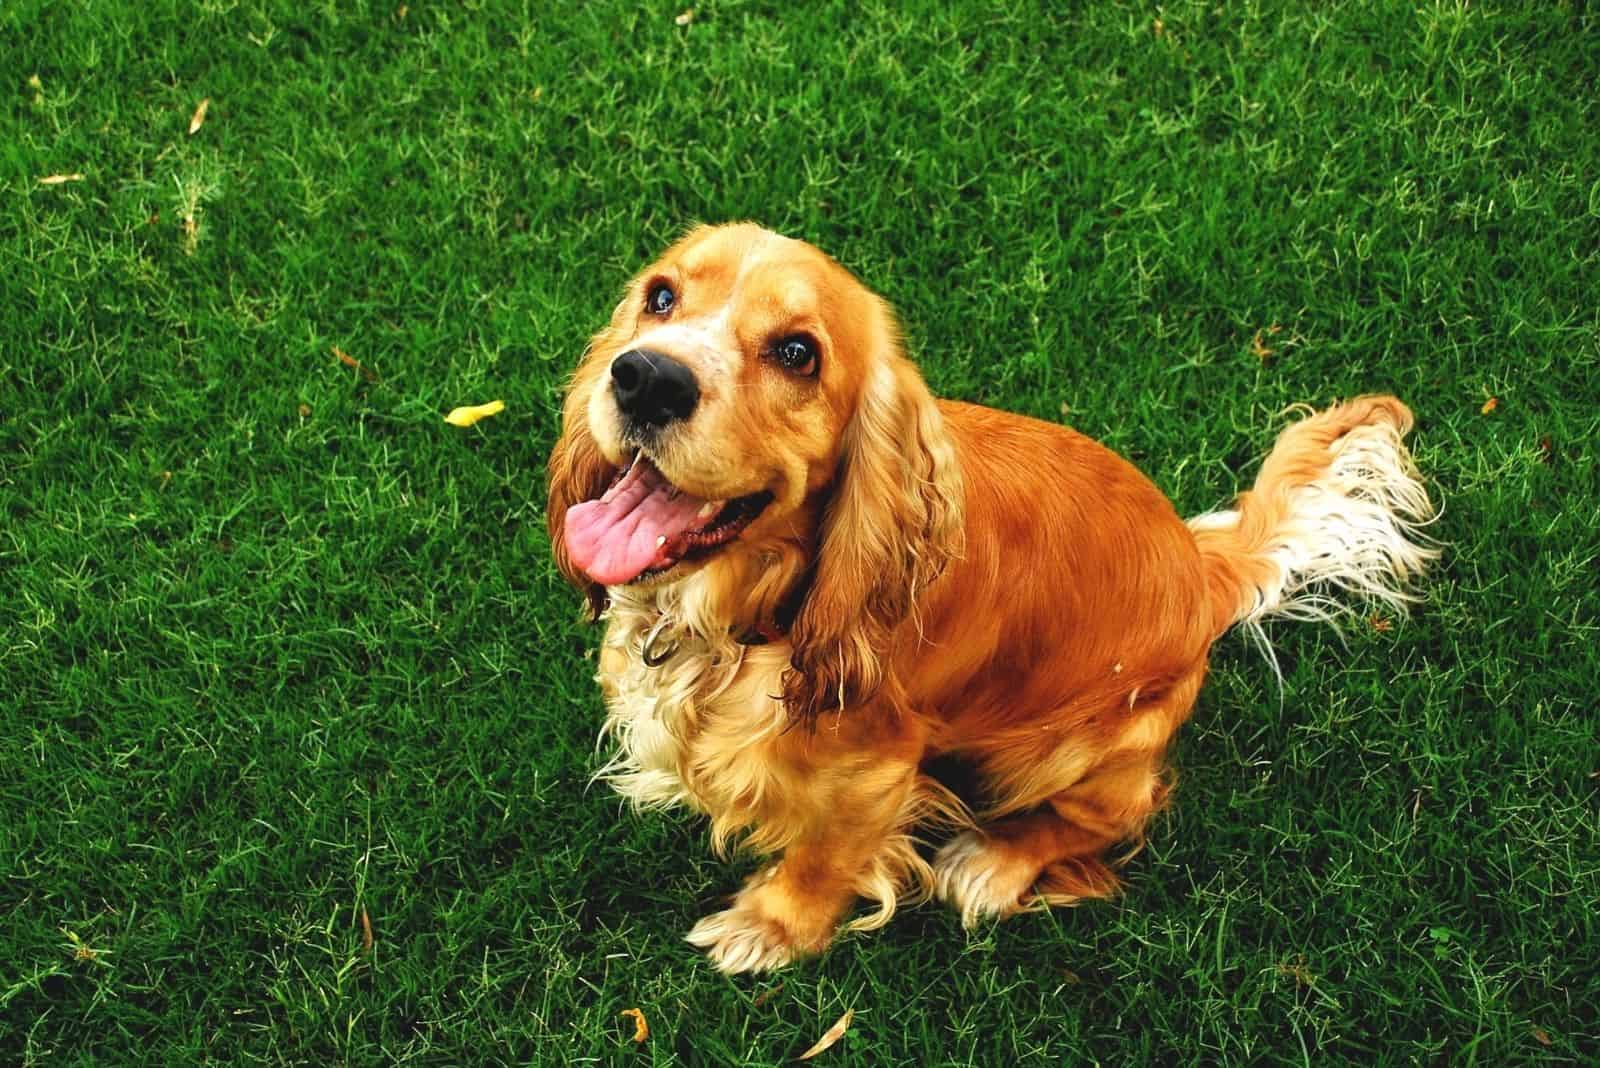 cocker spaniel with intact tail sitting on the grass looking upwards at the camera on high angle